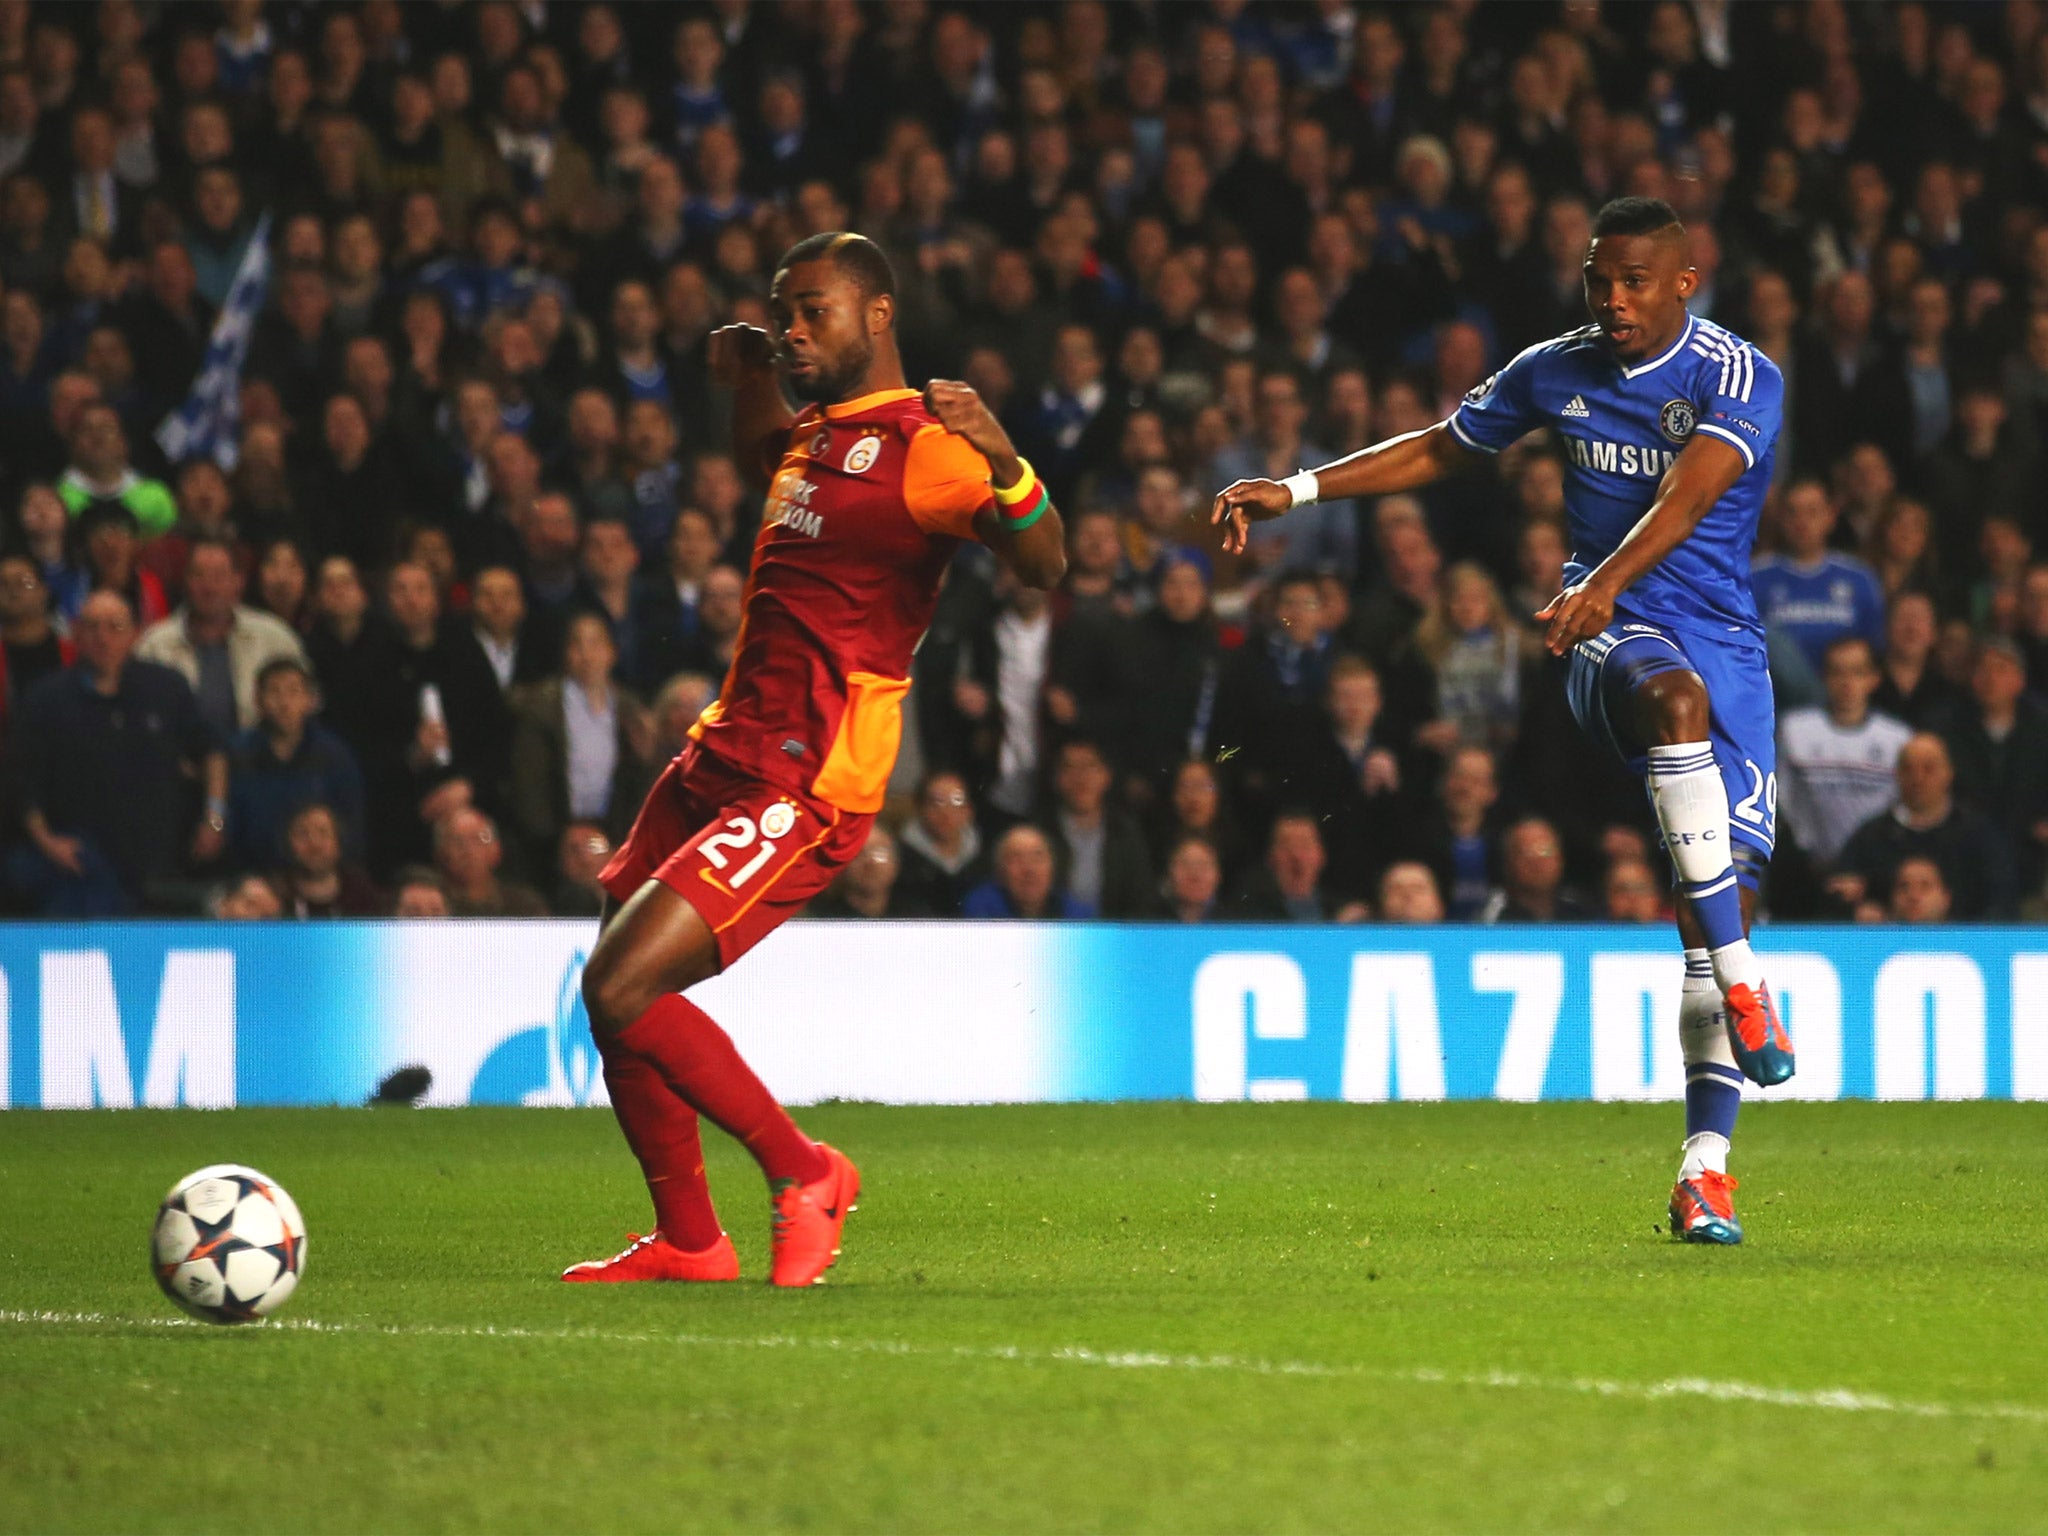 Samuel Eto'o shoots and scores the opening goal (GETTY)